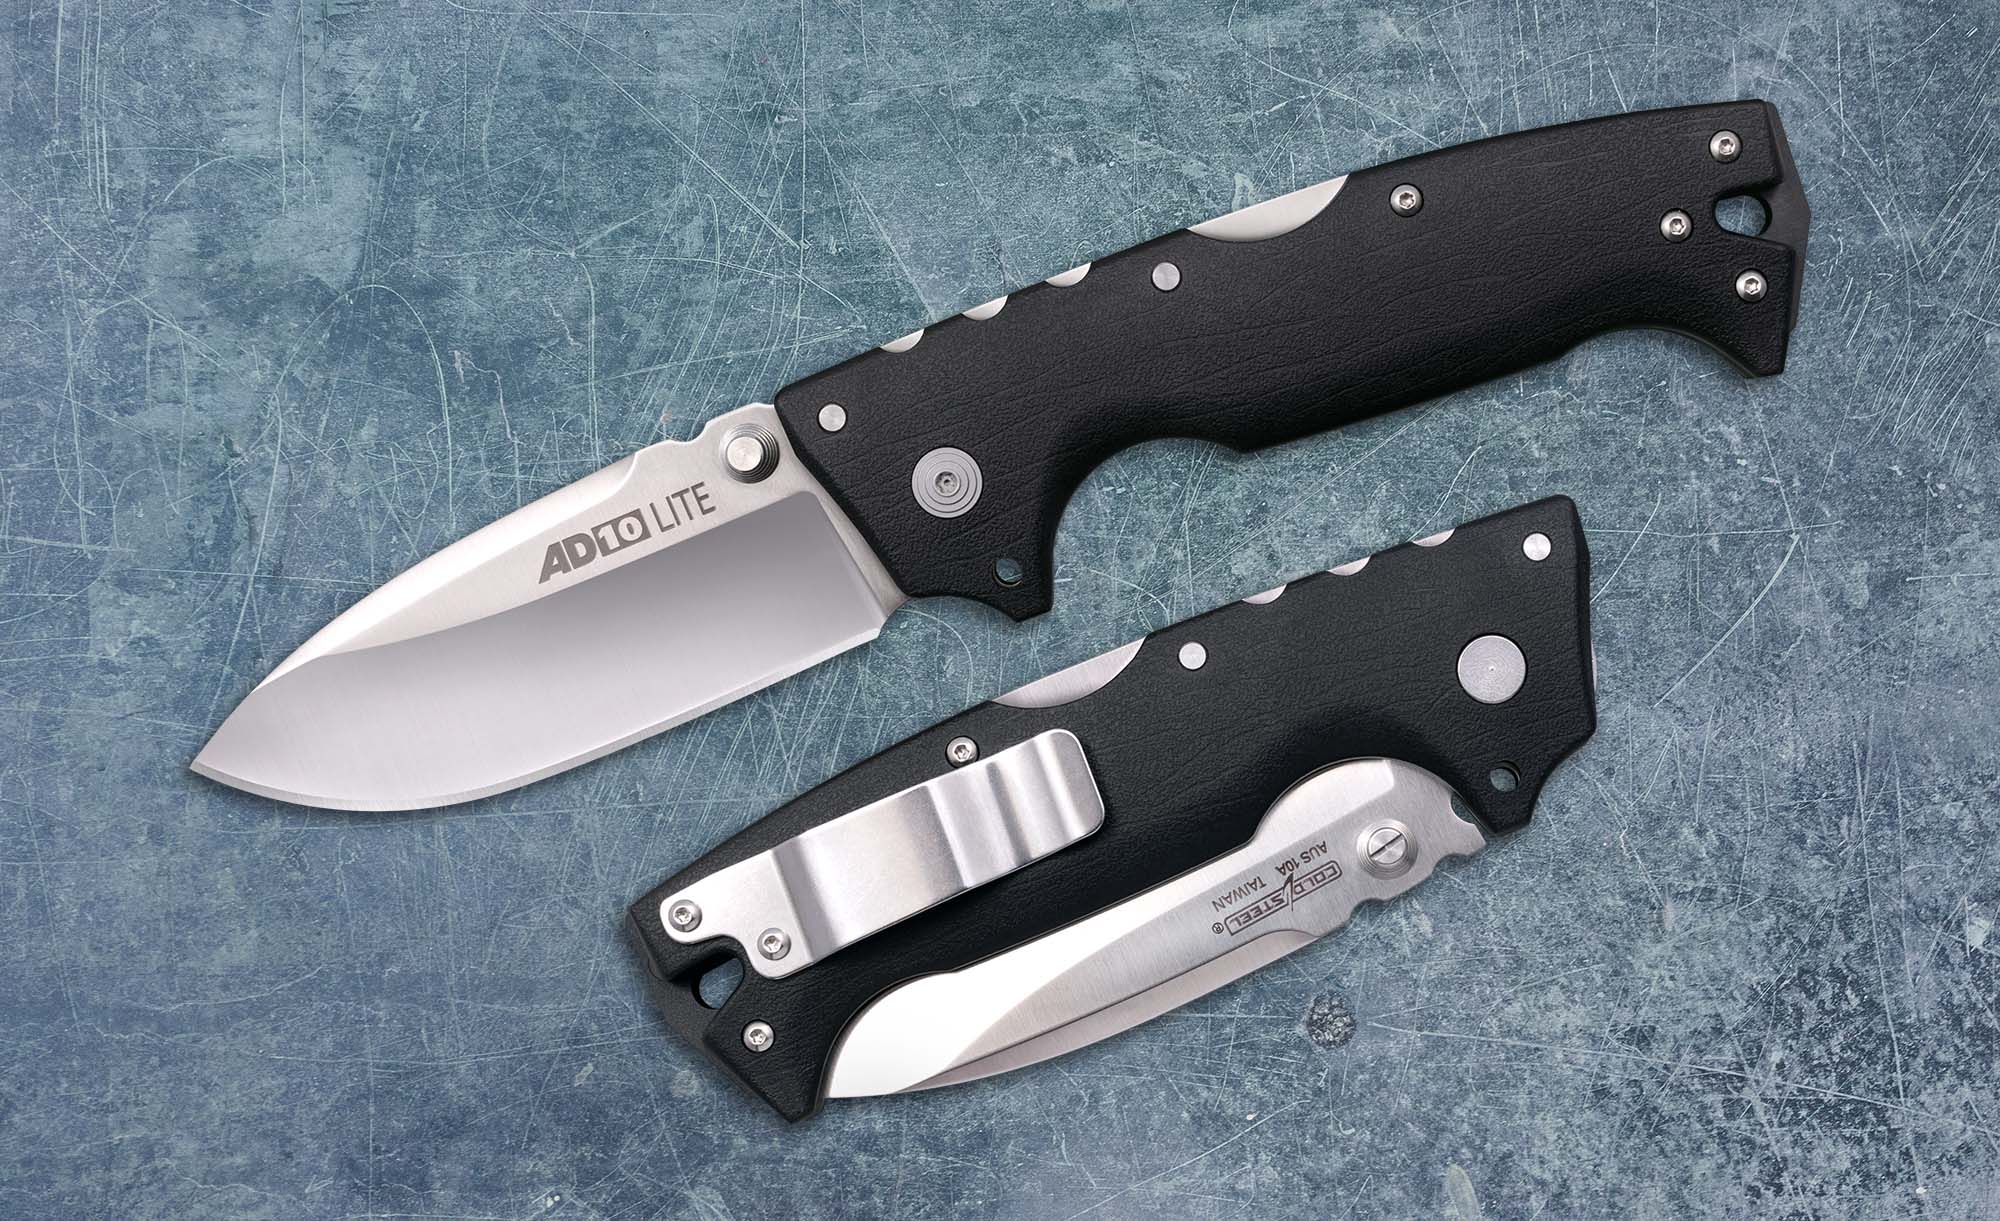 Cold Steel Gives the AD-10 New Lite Models